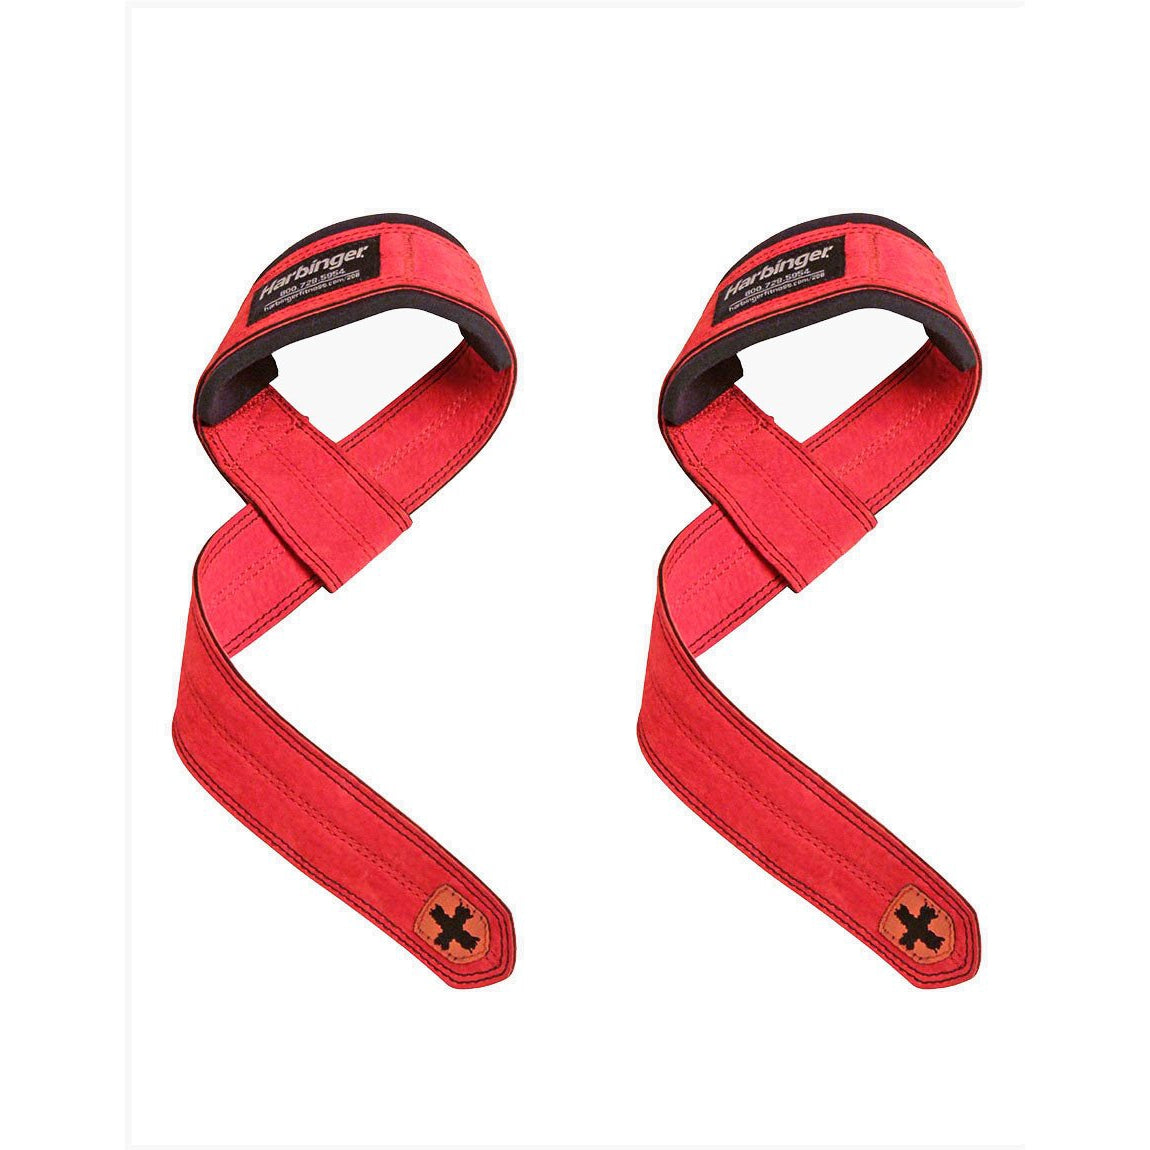 Padded Leather Lifting Straps